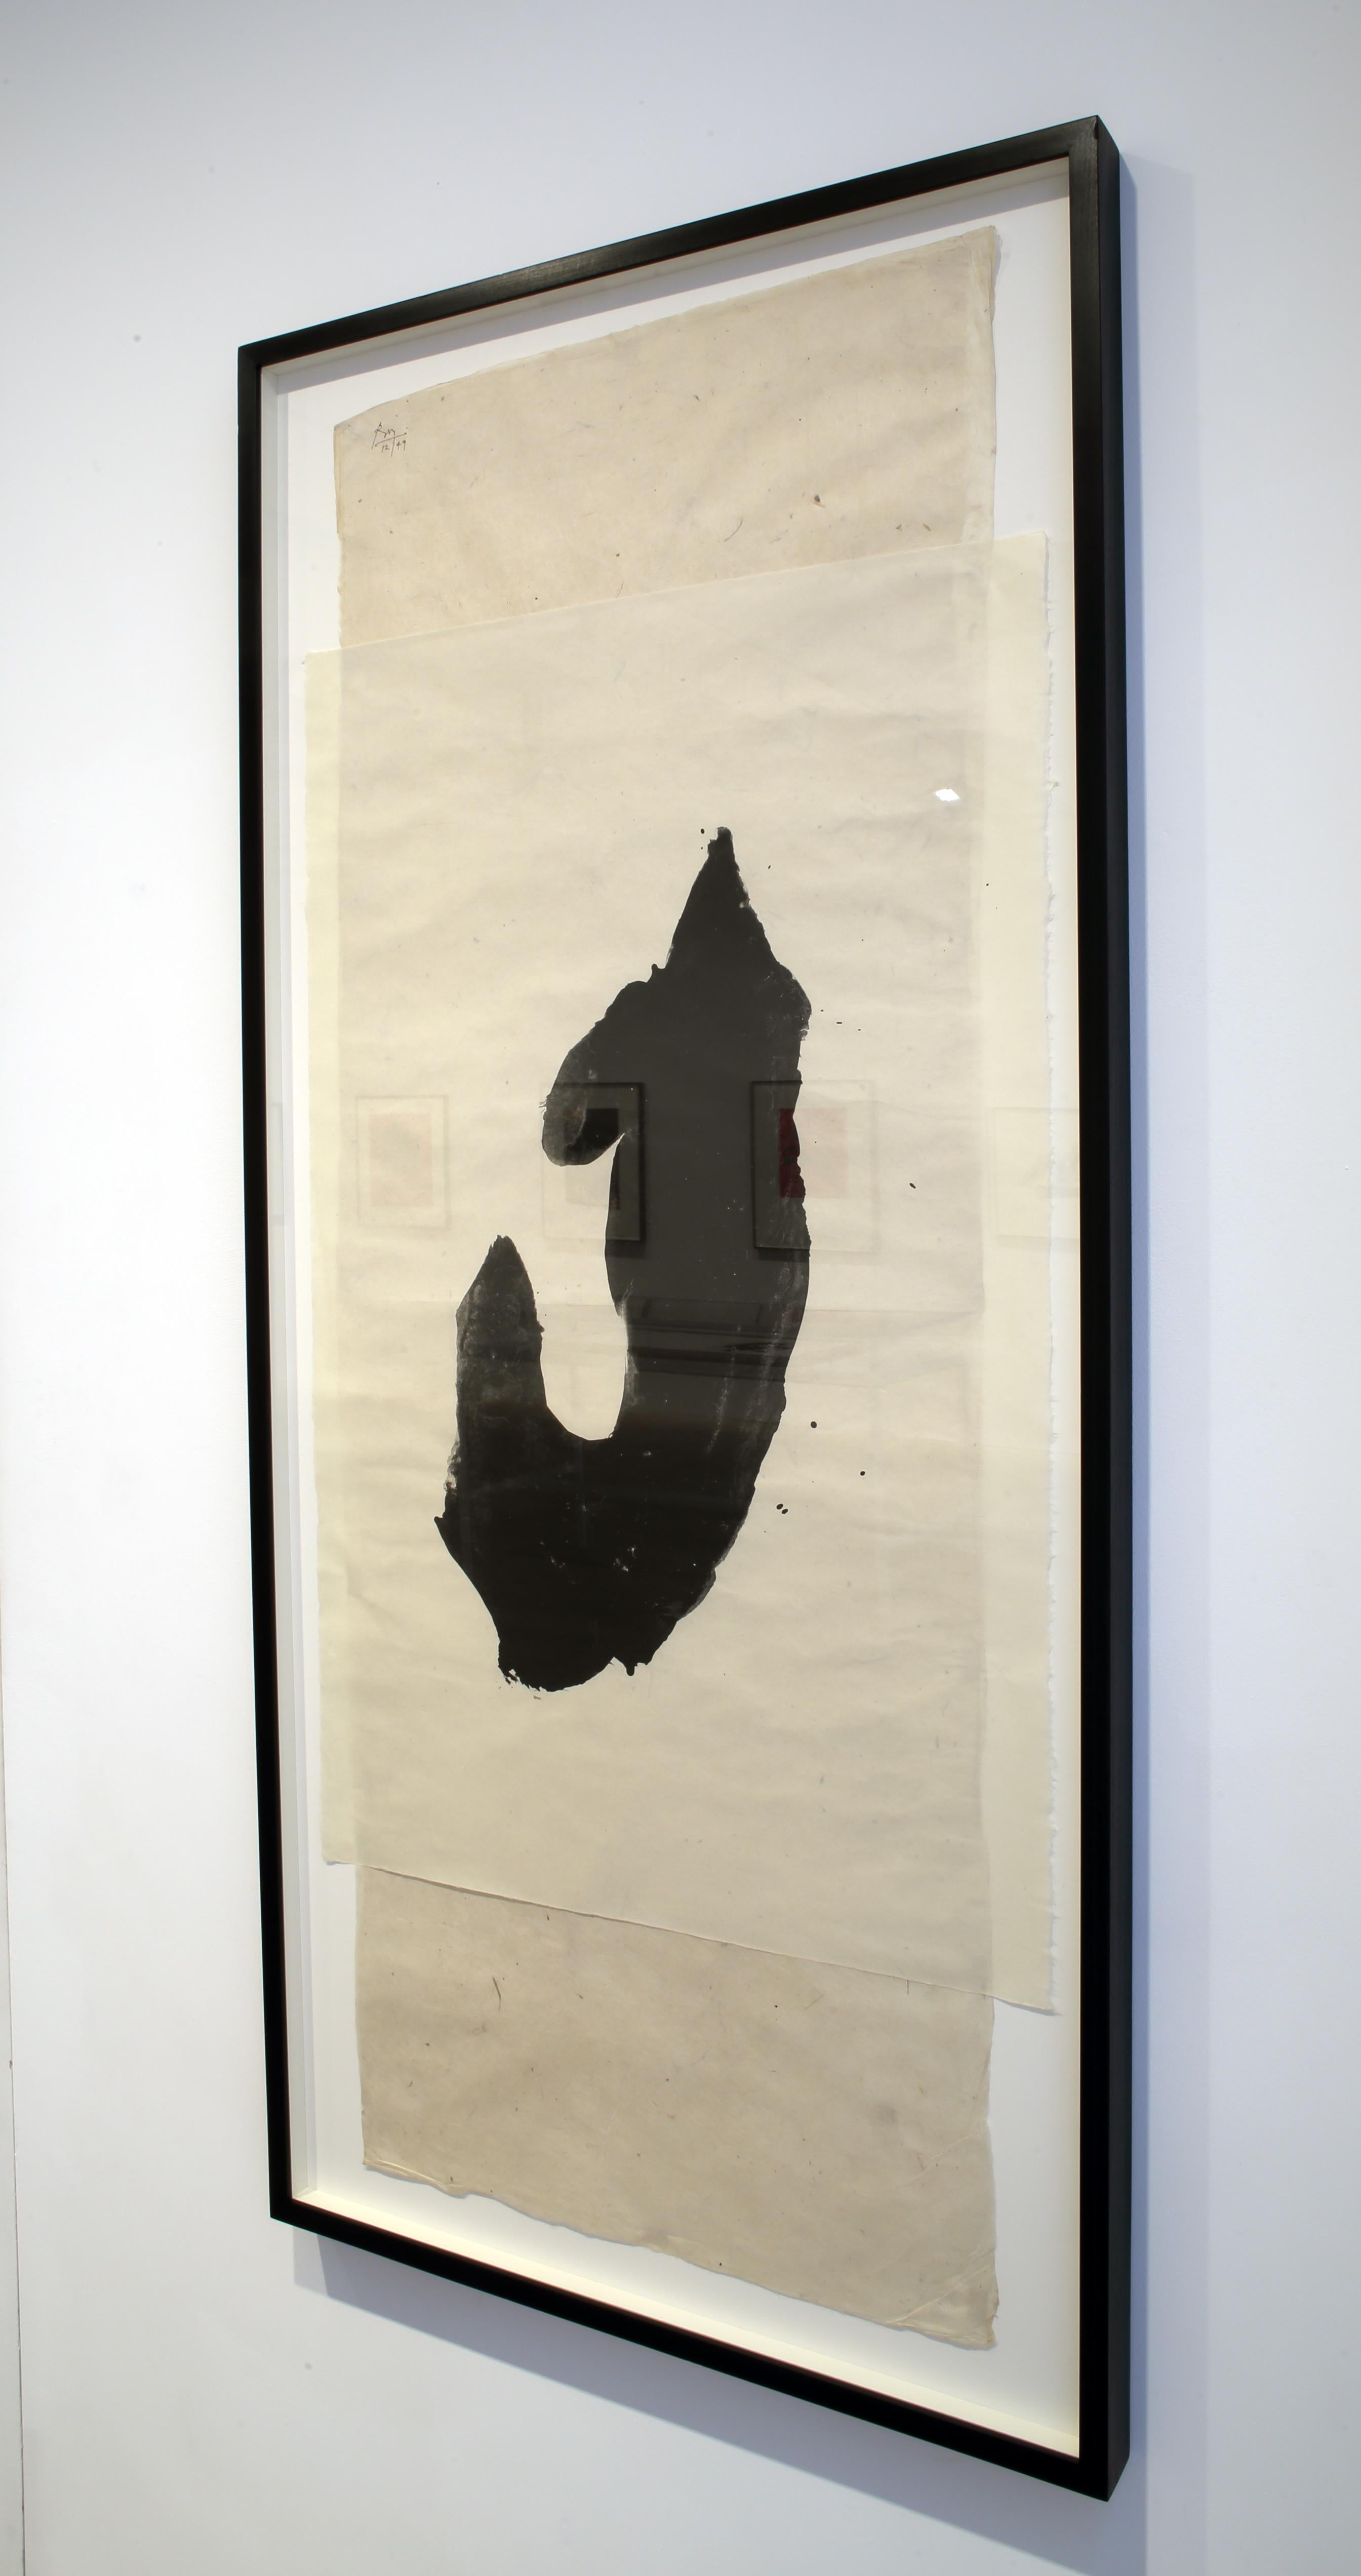 Samurai II - Abstract Expressionist Print by Robert Motherwell